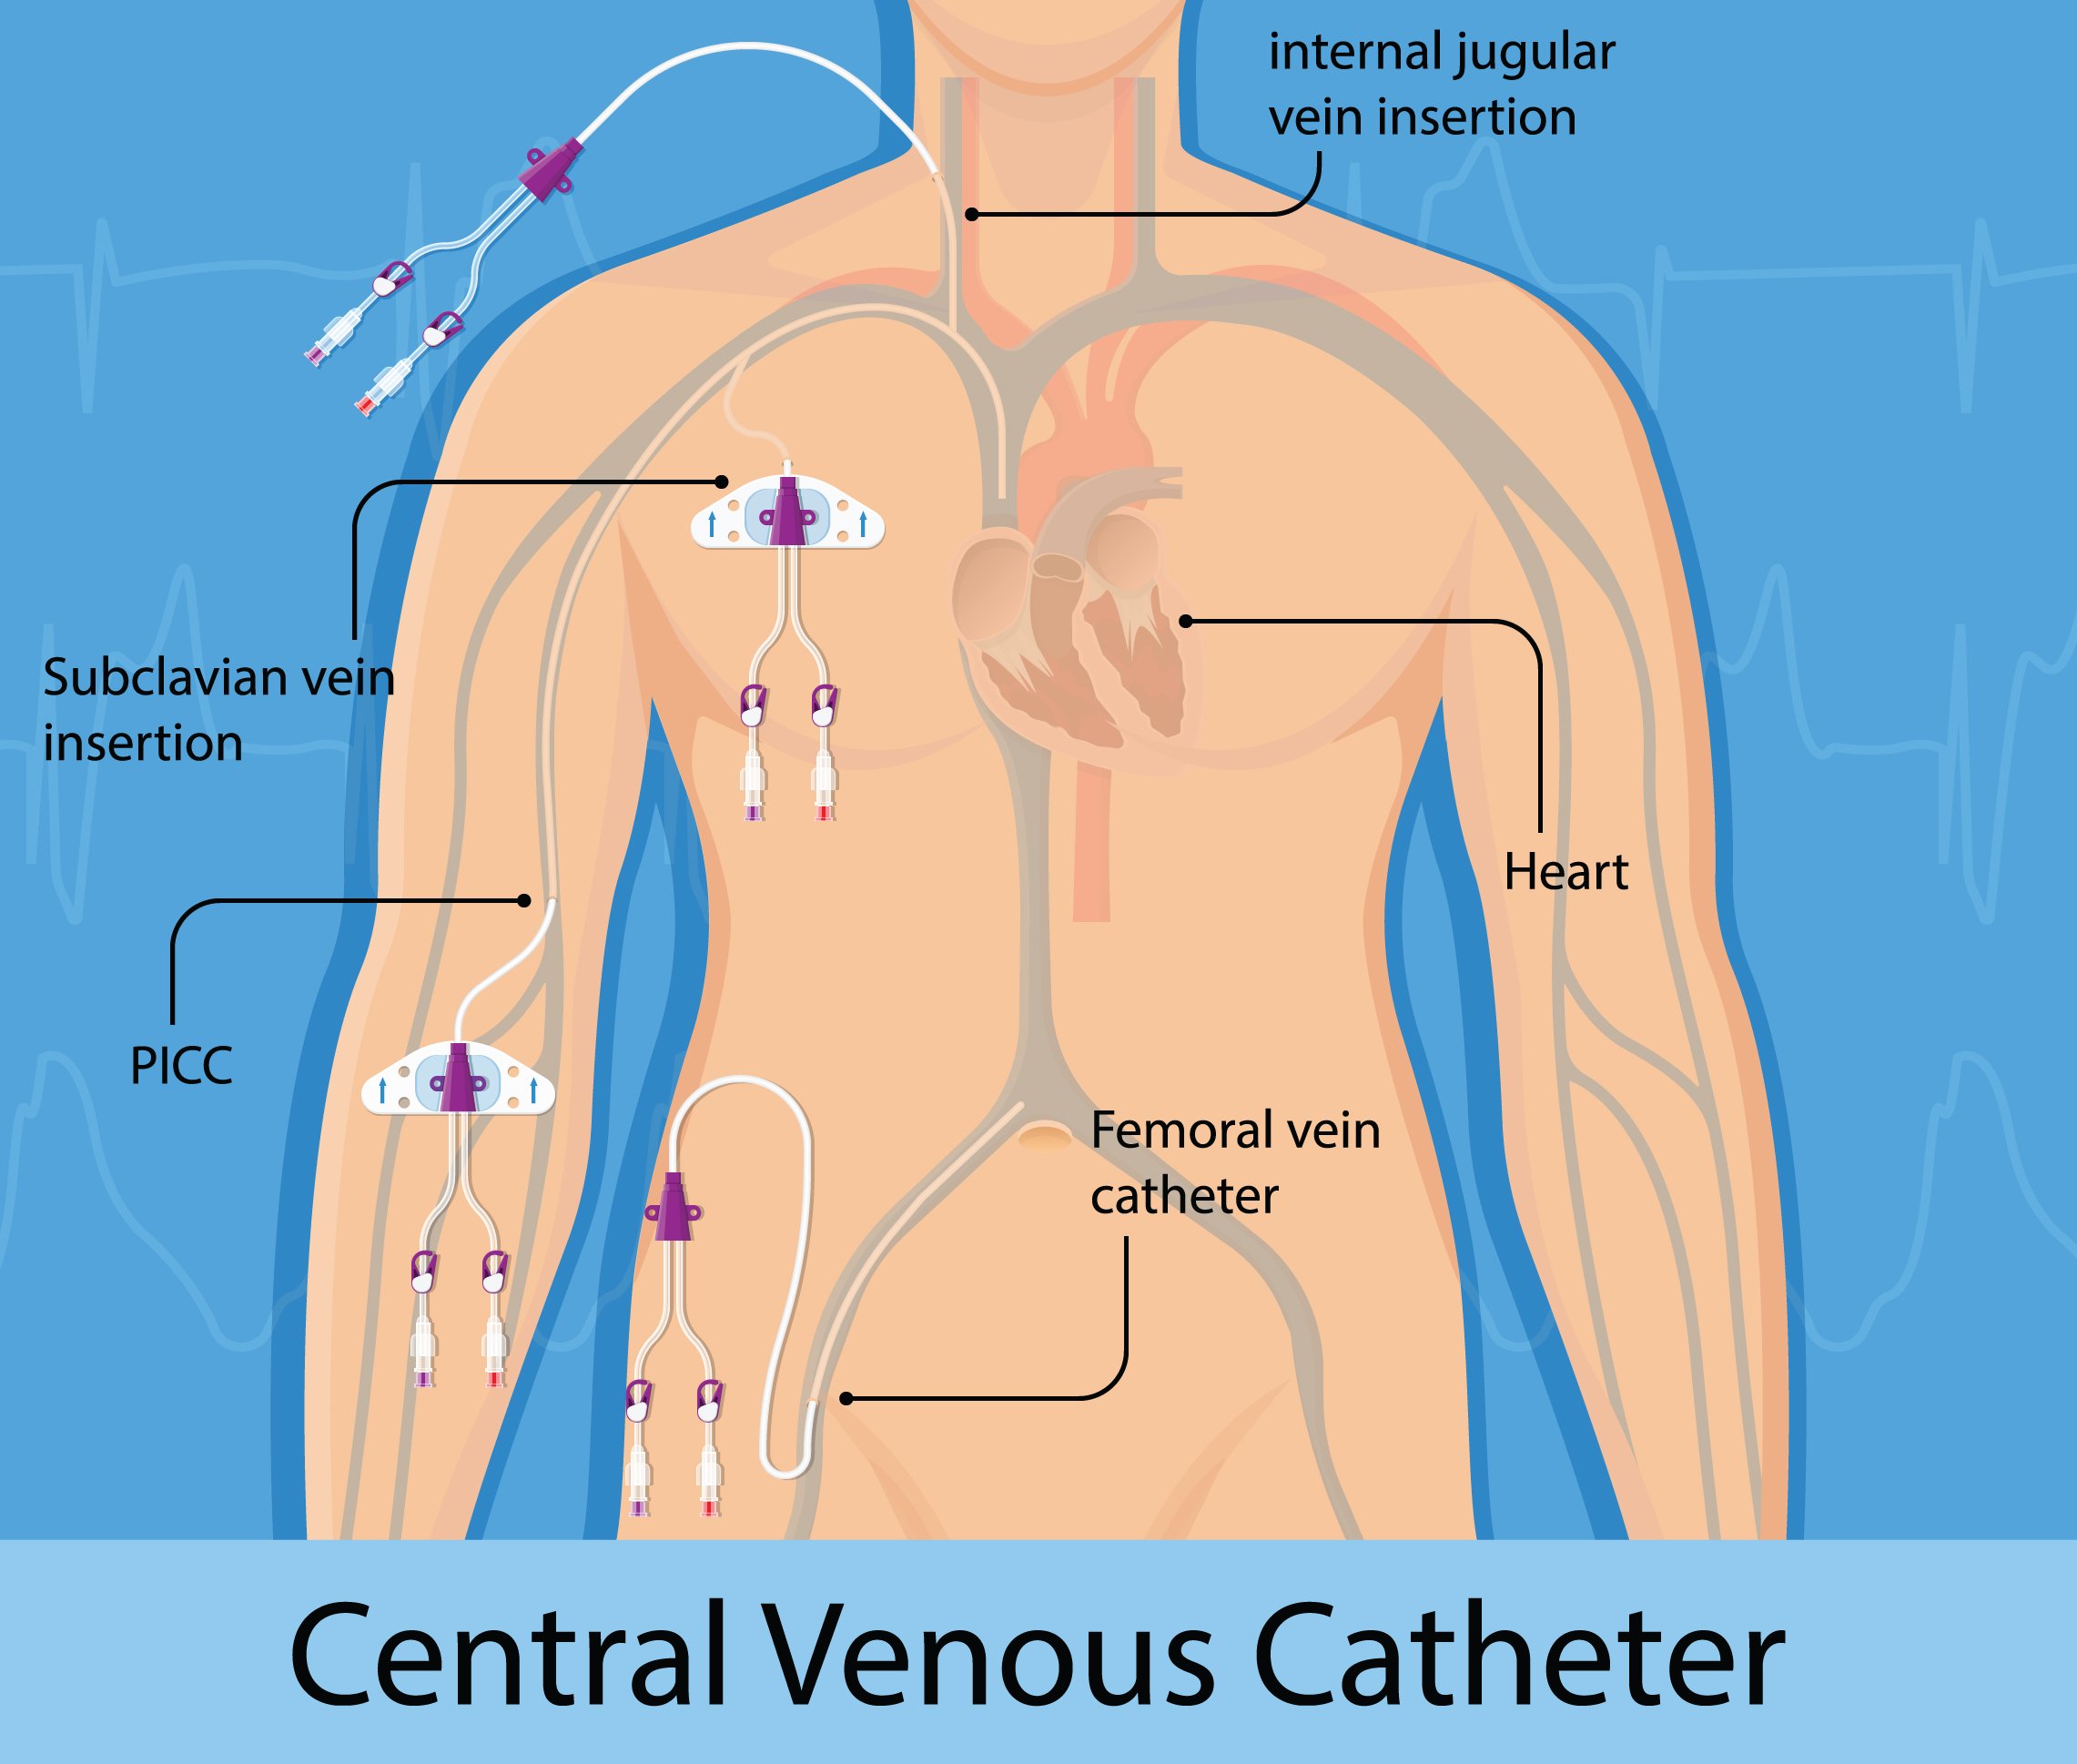 What Are Central Venous Catheters?